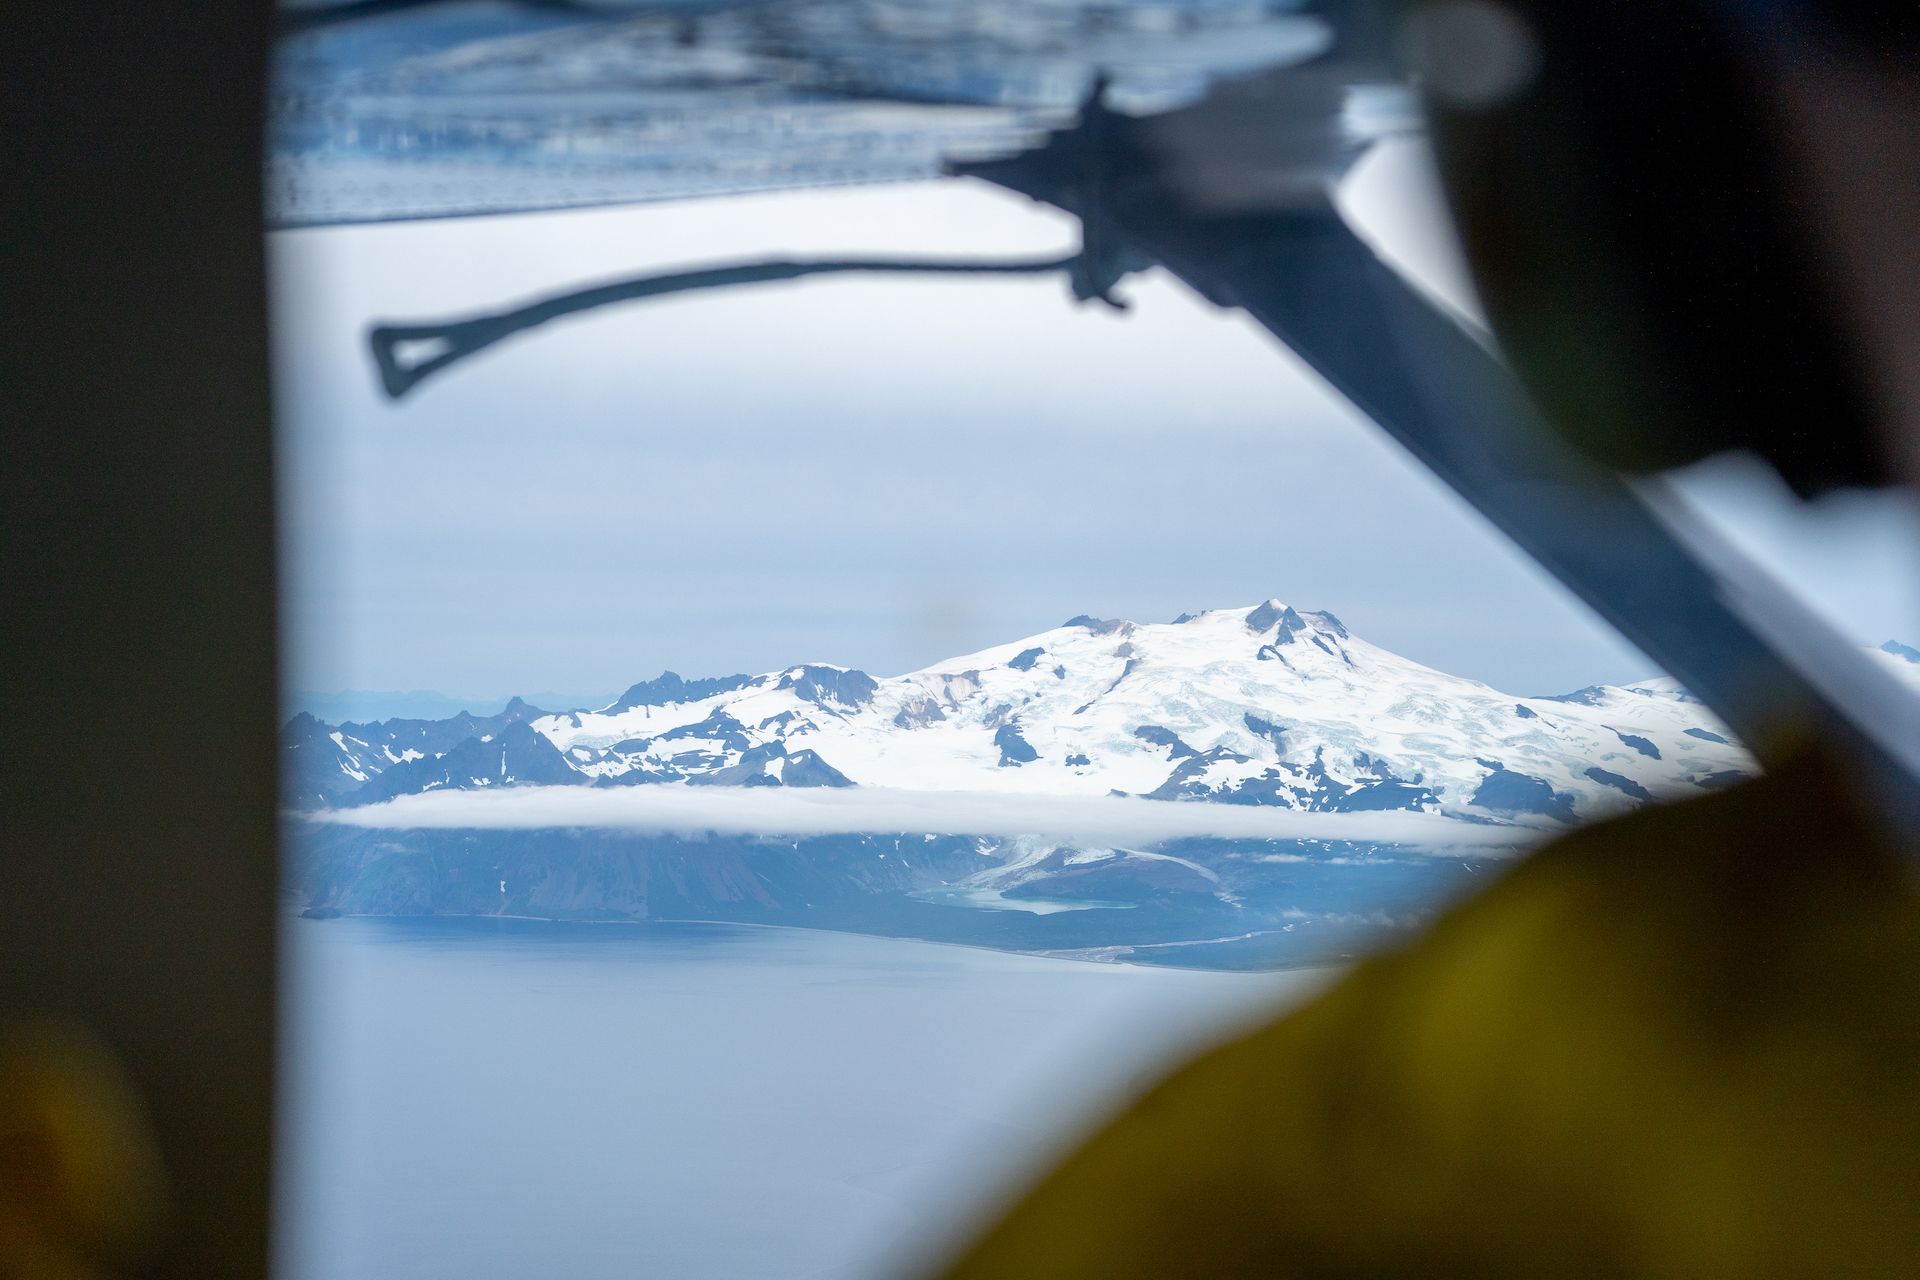 After roughly 45 minutes of flying over the ocean, we arrived above Katmai National Park and could see many glaciers covering the mountains in the distance.